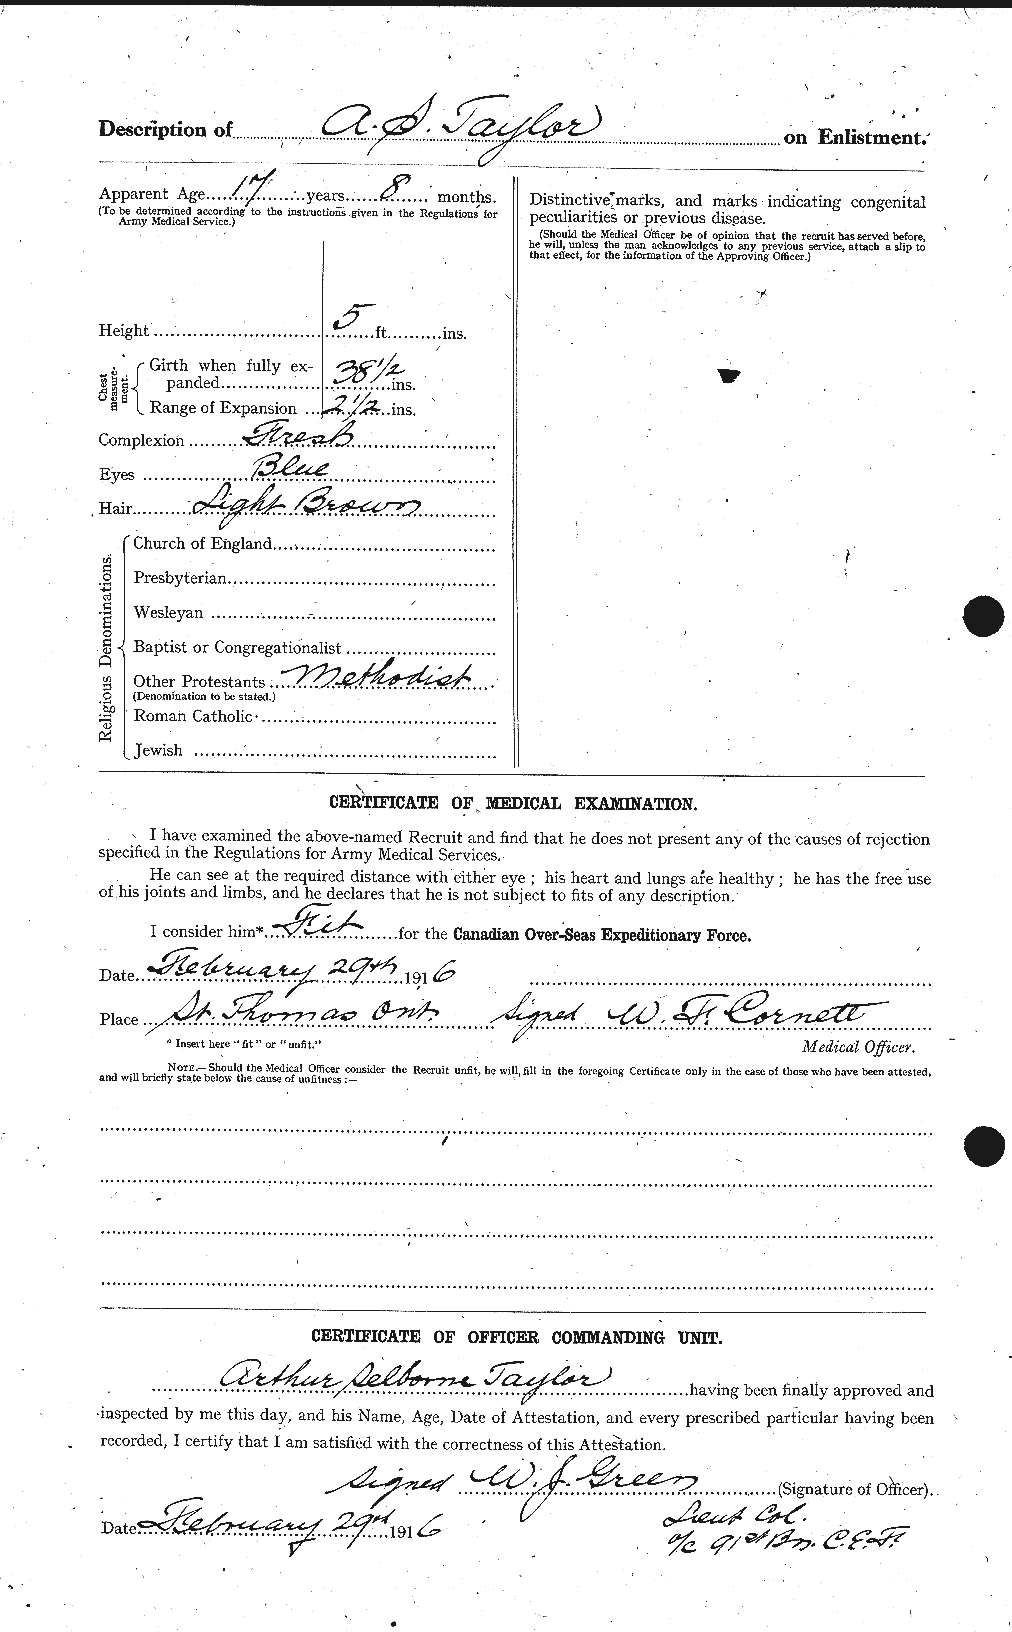 Personnel Records of the First World War - CEF 626744b